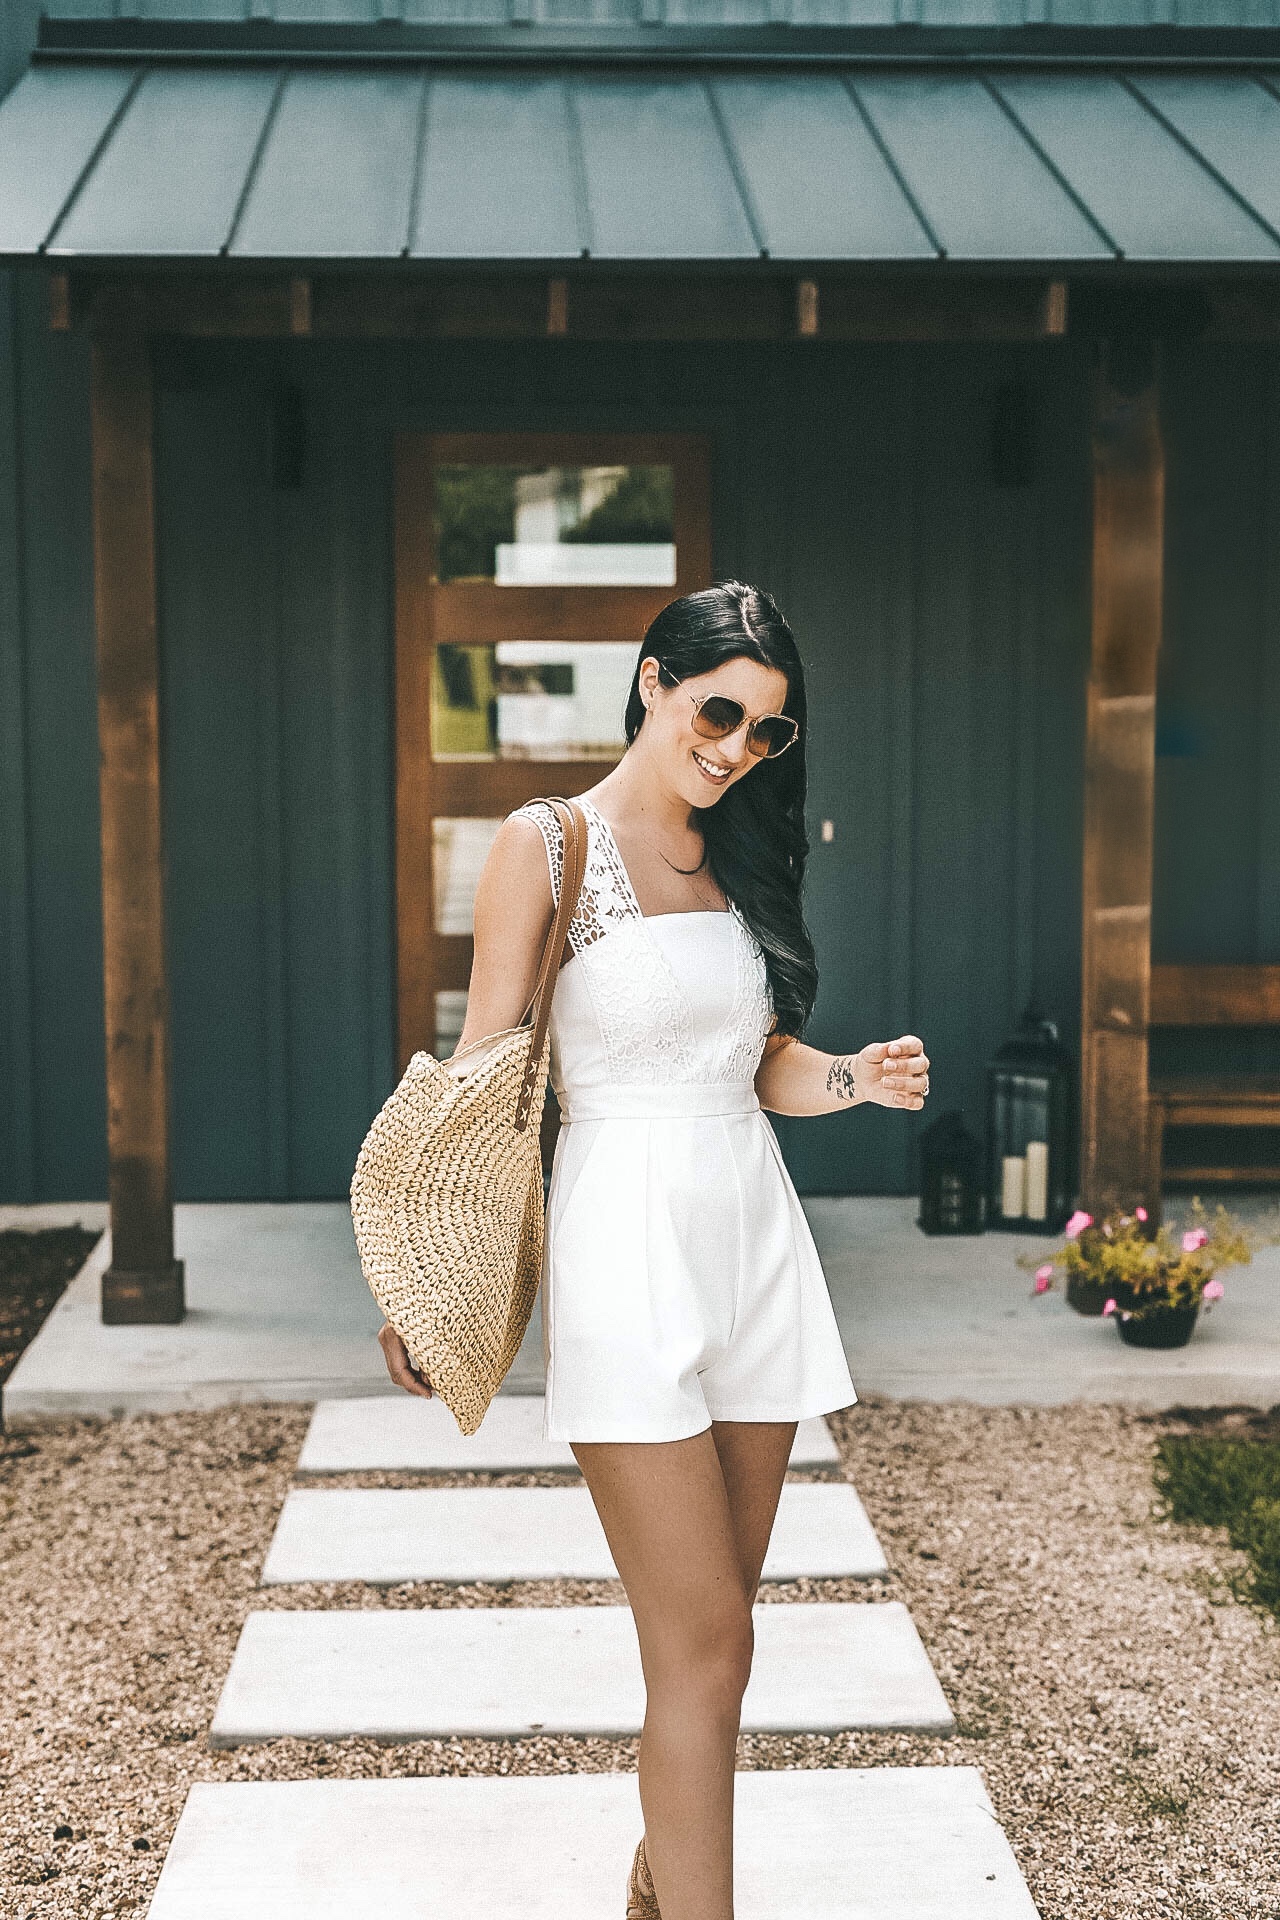 Affordable White Lace Romper for Summer | Chicwish Romper | romper style tips | how to wear a romper || Dressed to Kill #summerfashion #fashion #style #outfits #summeroutfits #romper #dtkaustin - {Chicwish White Lace Romper + Giveaway} featured by popular Austin fashion blogger, Dressed to Kill